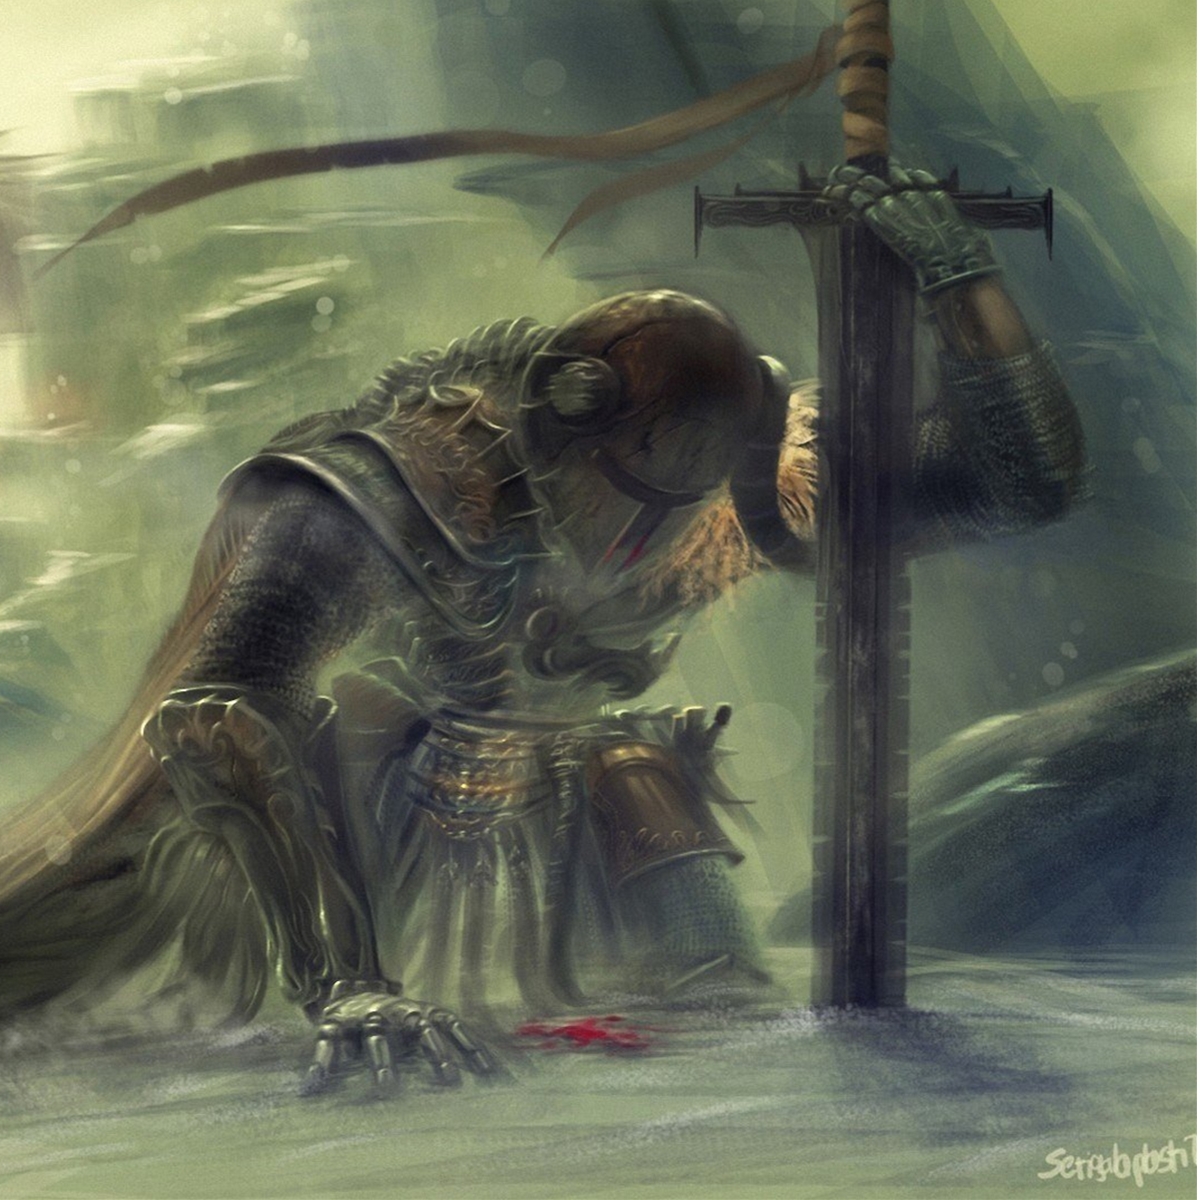 [Image: Defeated-Knight-by-unknown-originator.jpg]